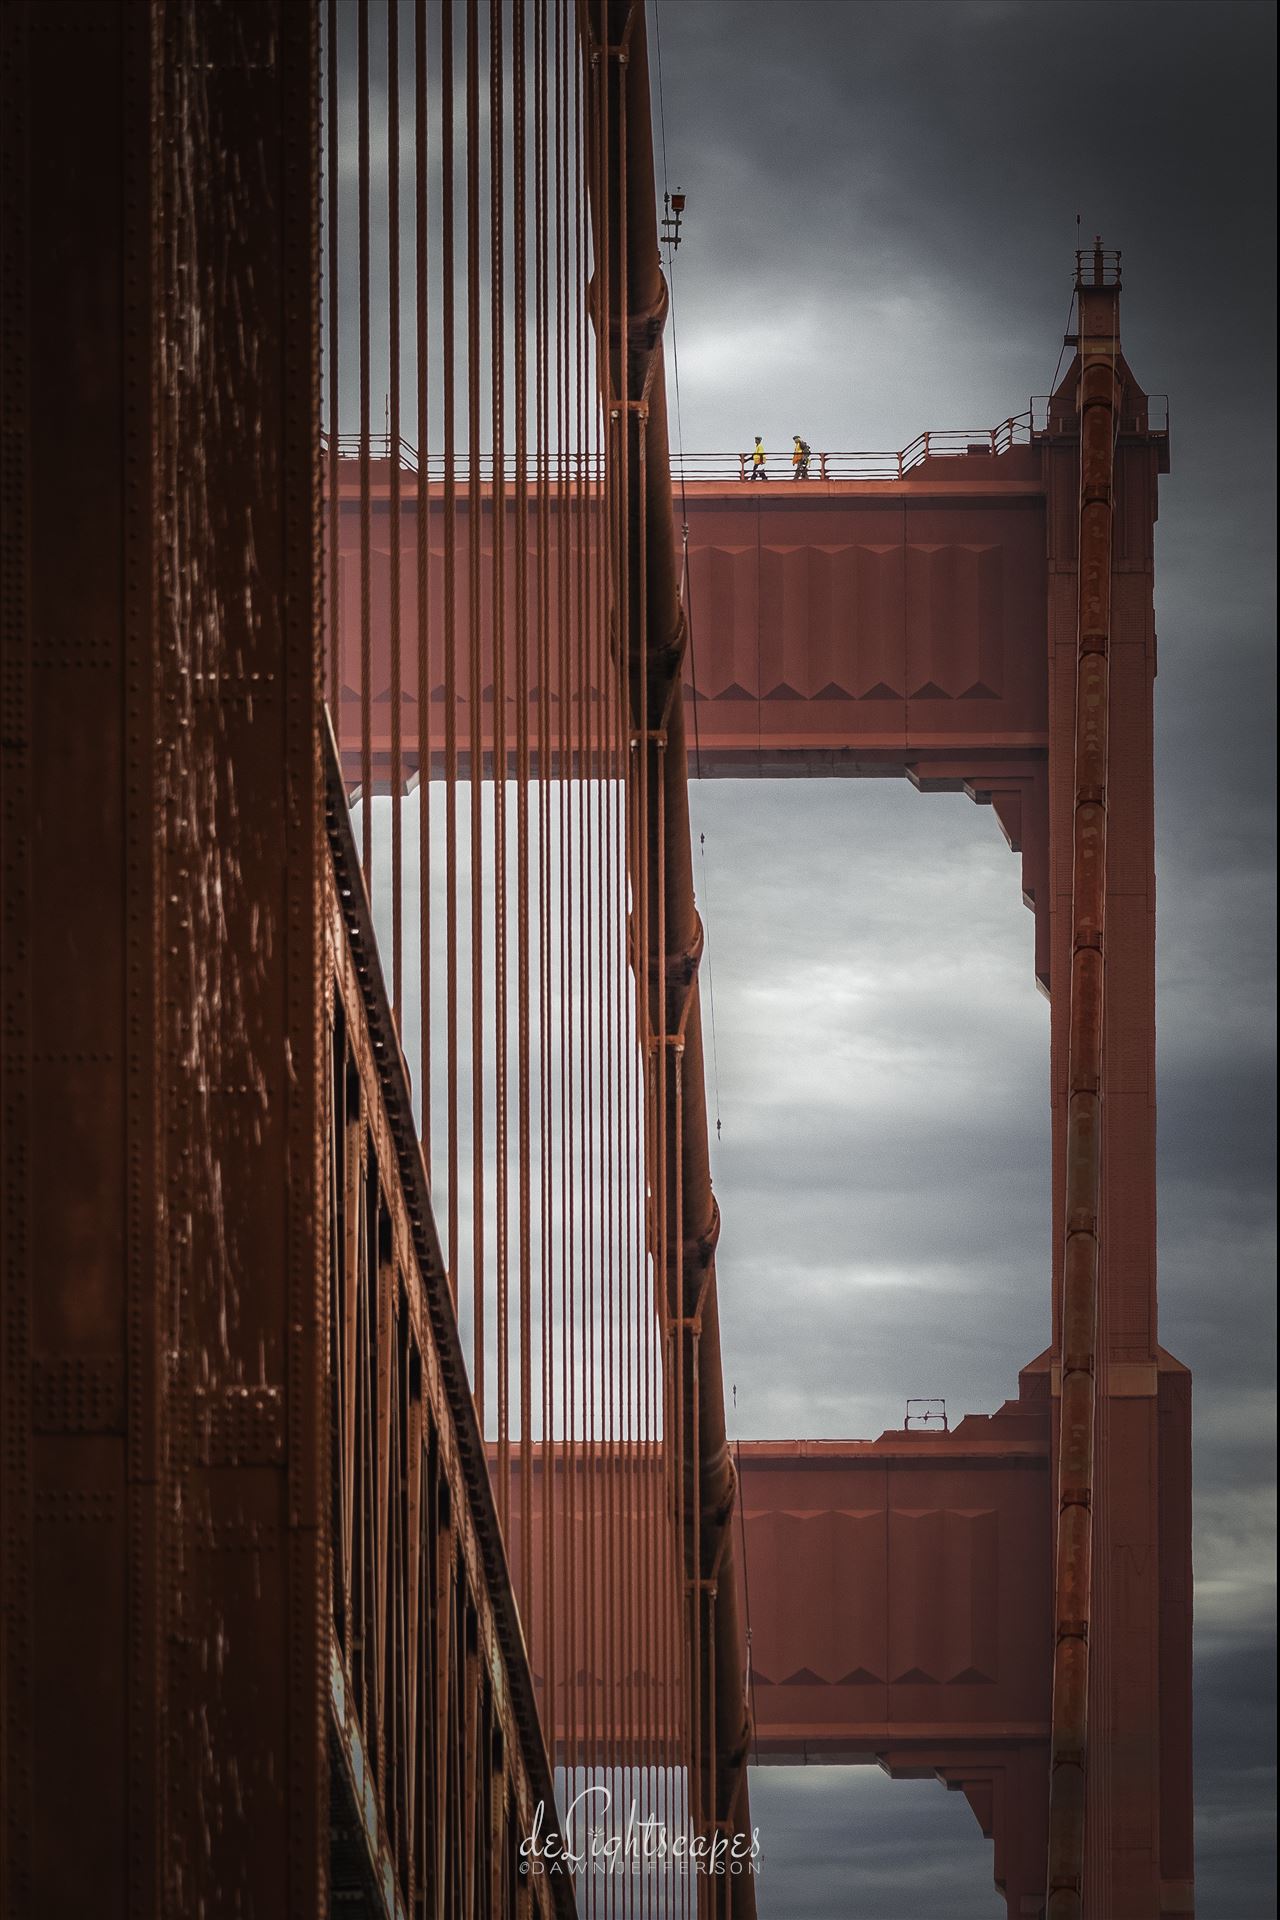 Hard Day's Work Two workers on top of the Golden Gate Bridge by Dawn Jefferson